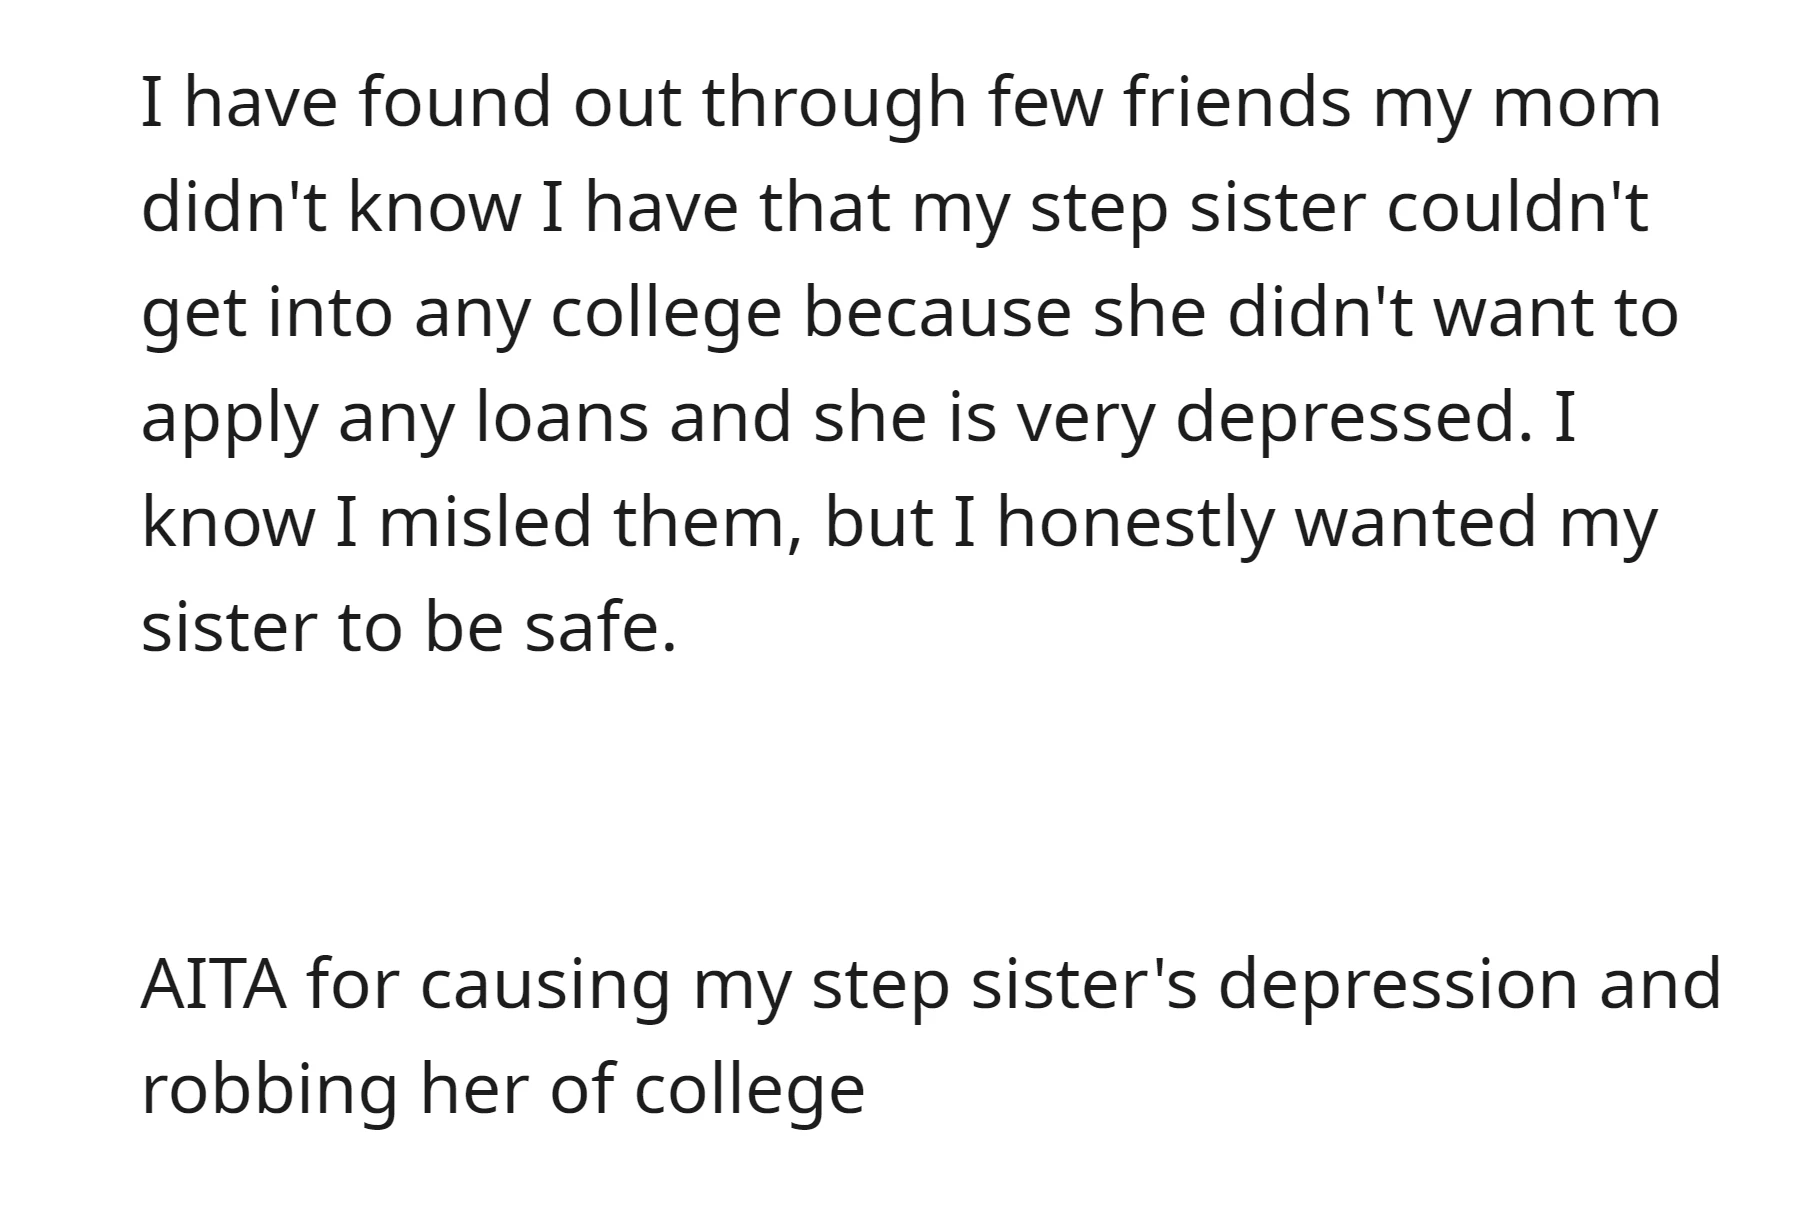 OP found that her stepsister couldn't attend college due to not applying for loans